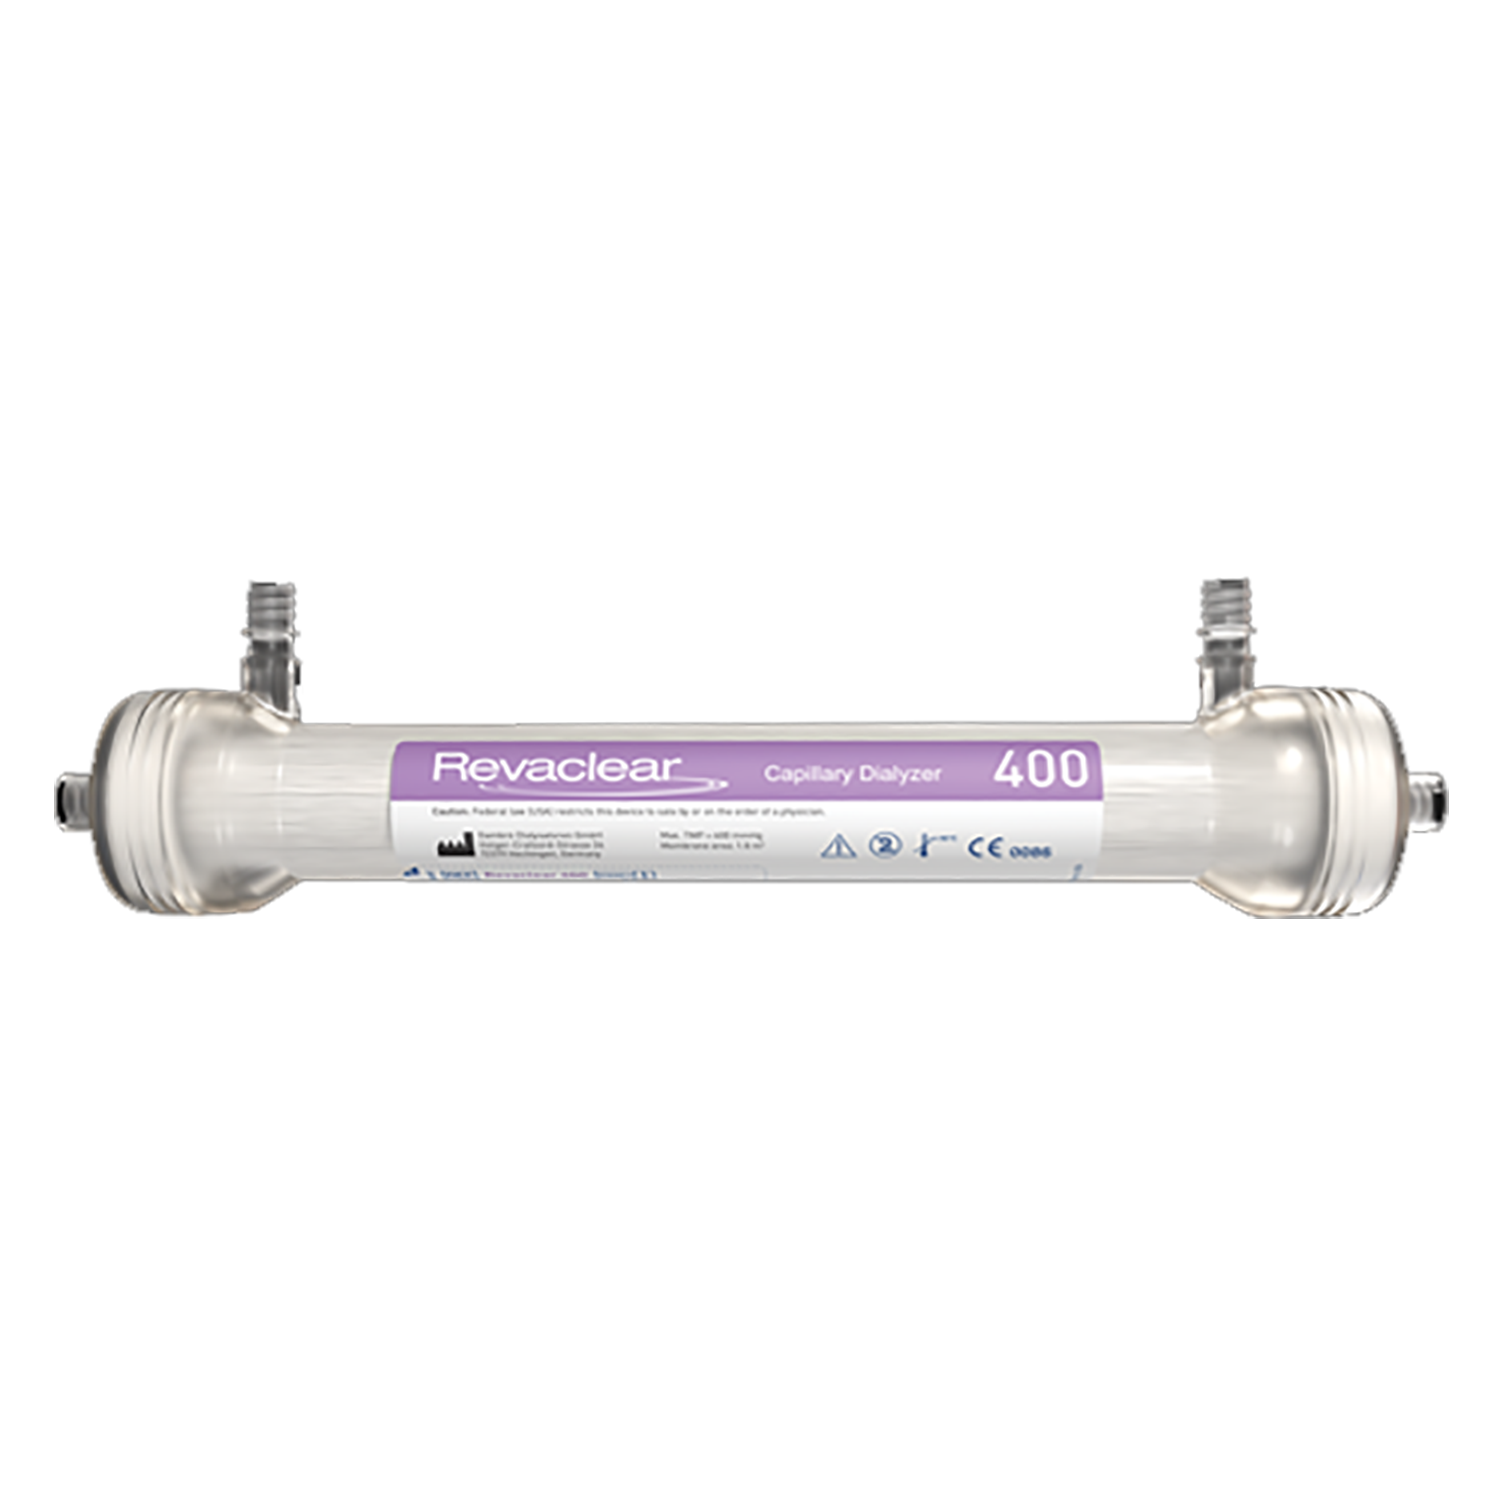 Baxter Revaclear 400 Capillary Dialyzers | Pack of 24 | Short Expiry Date